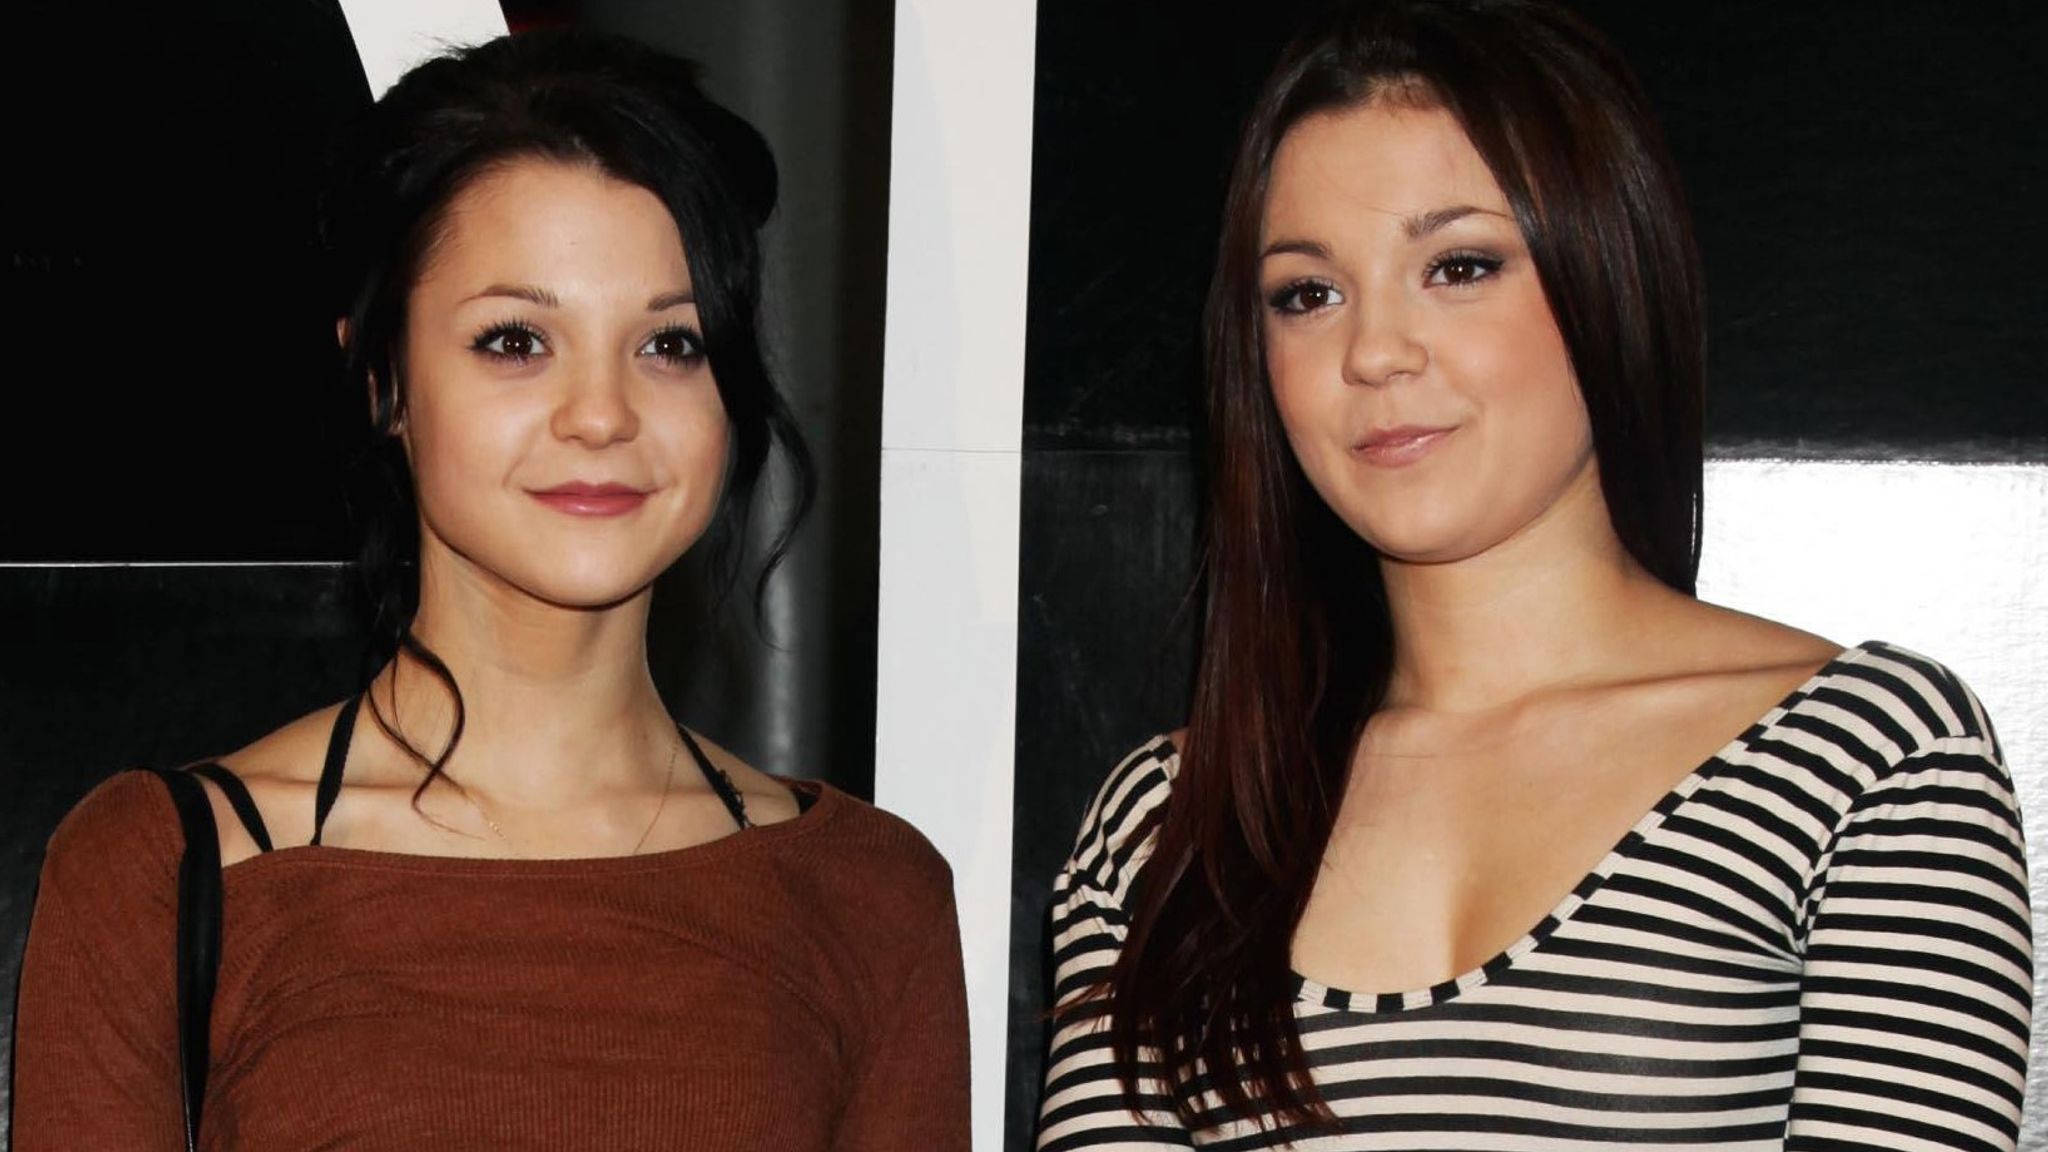 Kathryn Prescott Dog Journey Star Hit by cement truck And Hospitalized!